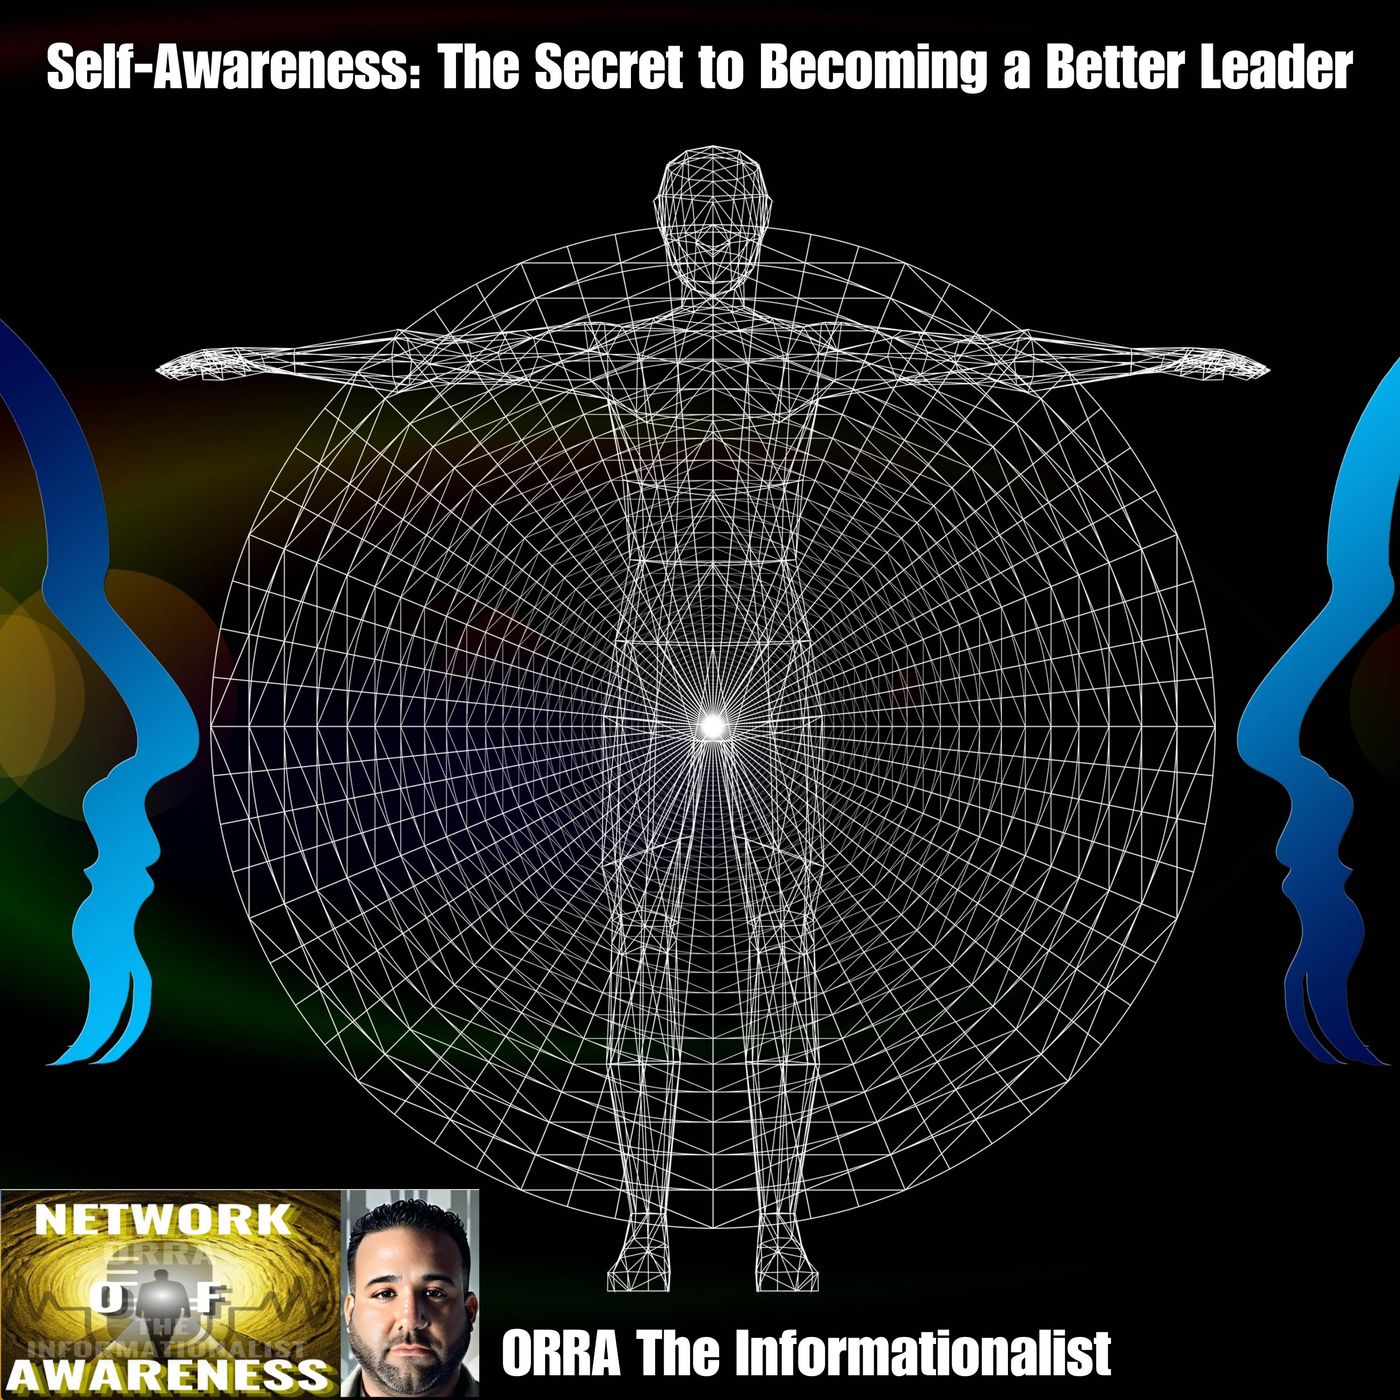 Self-Awareness: The Secret to Becoming a Better Leader